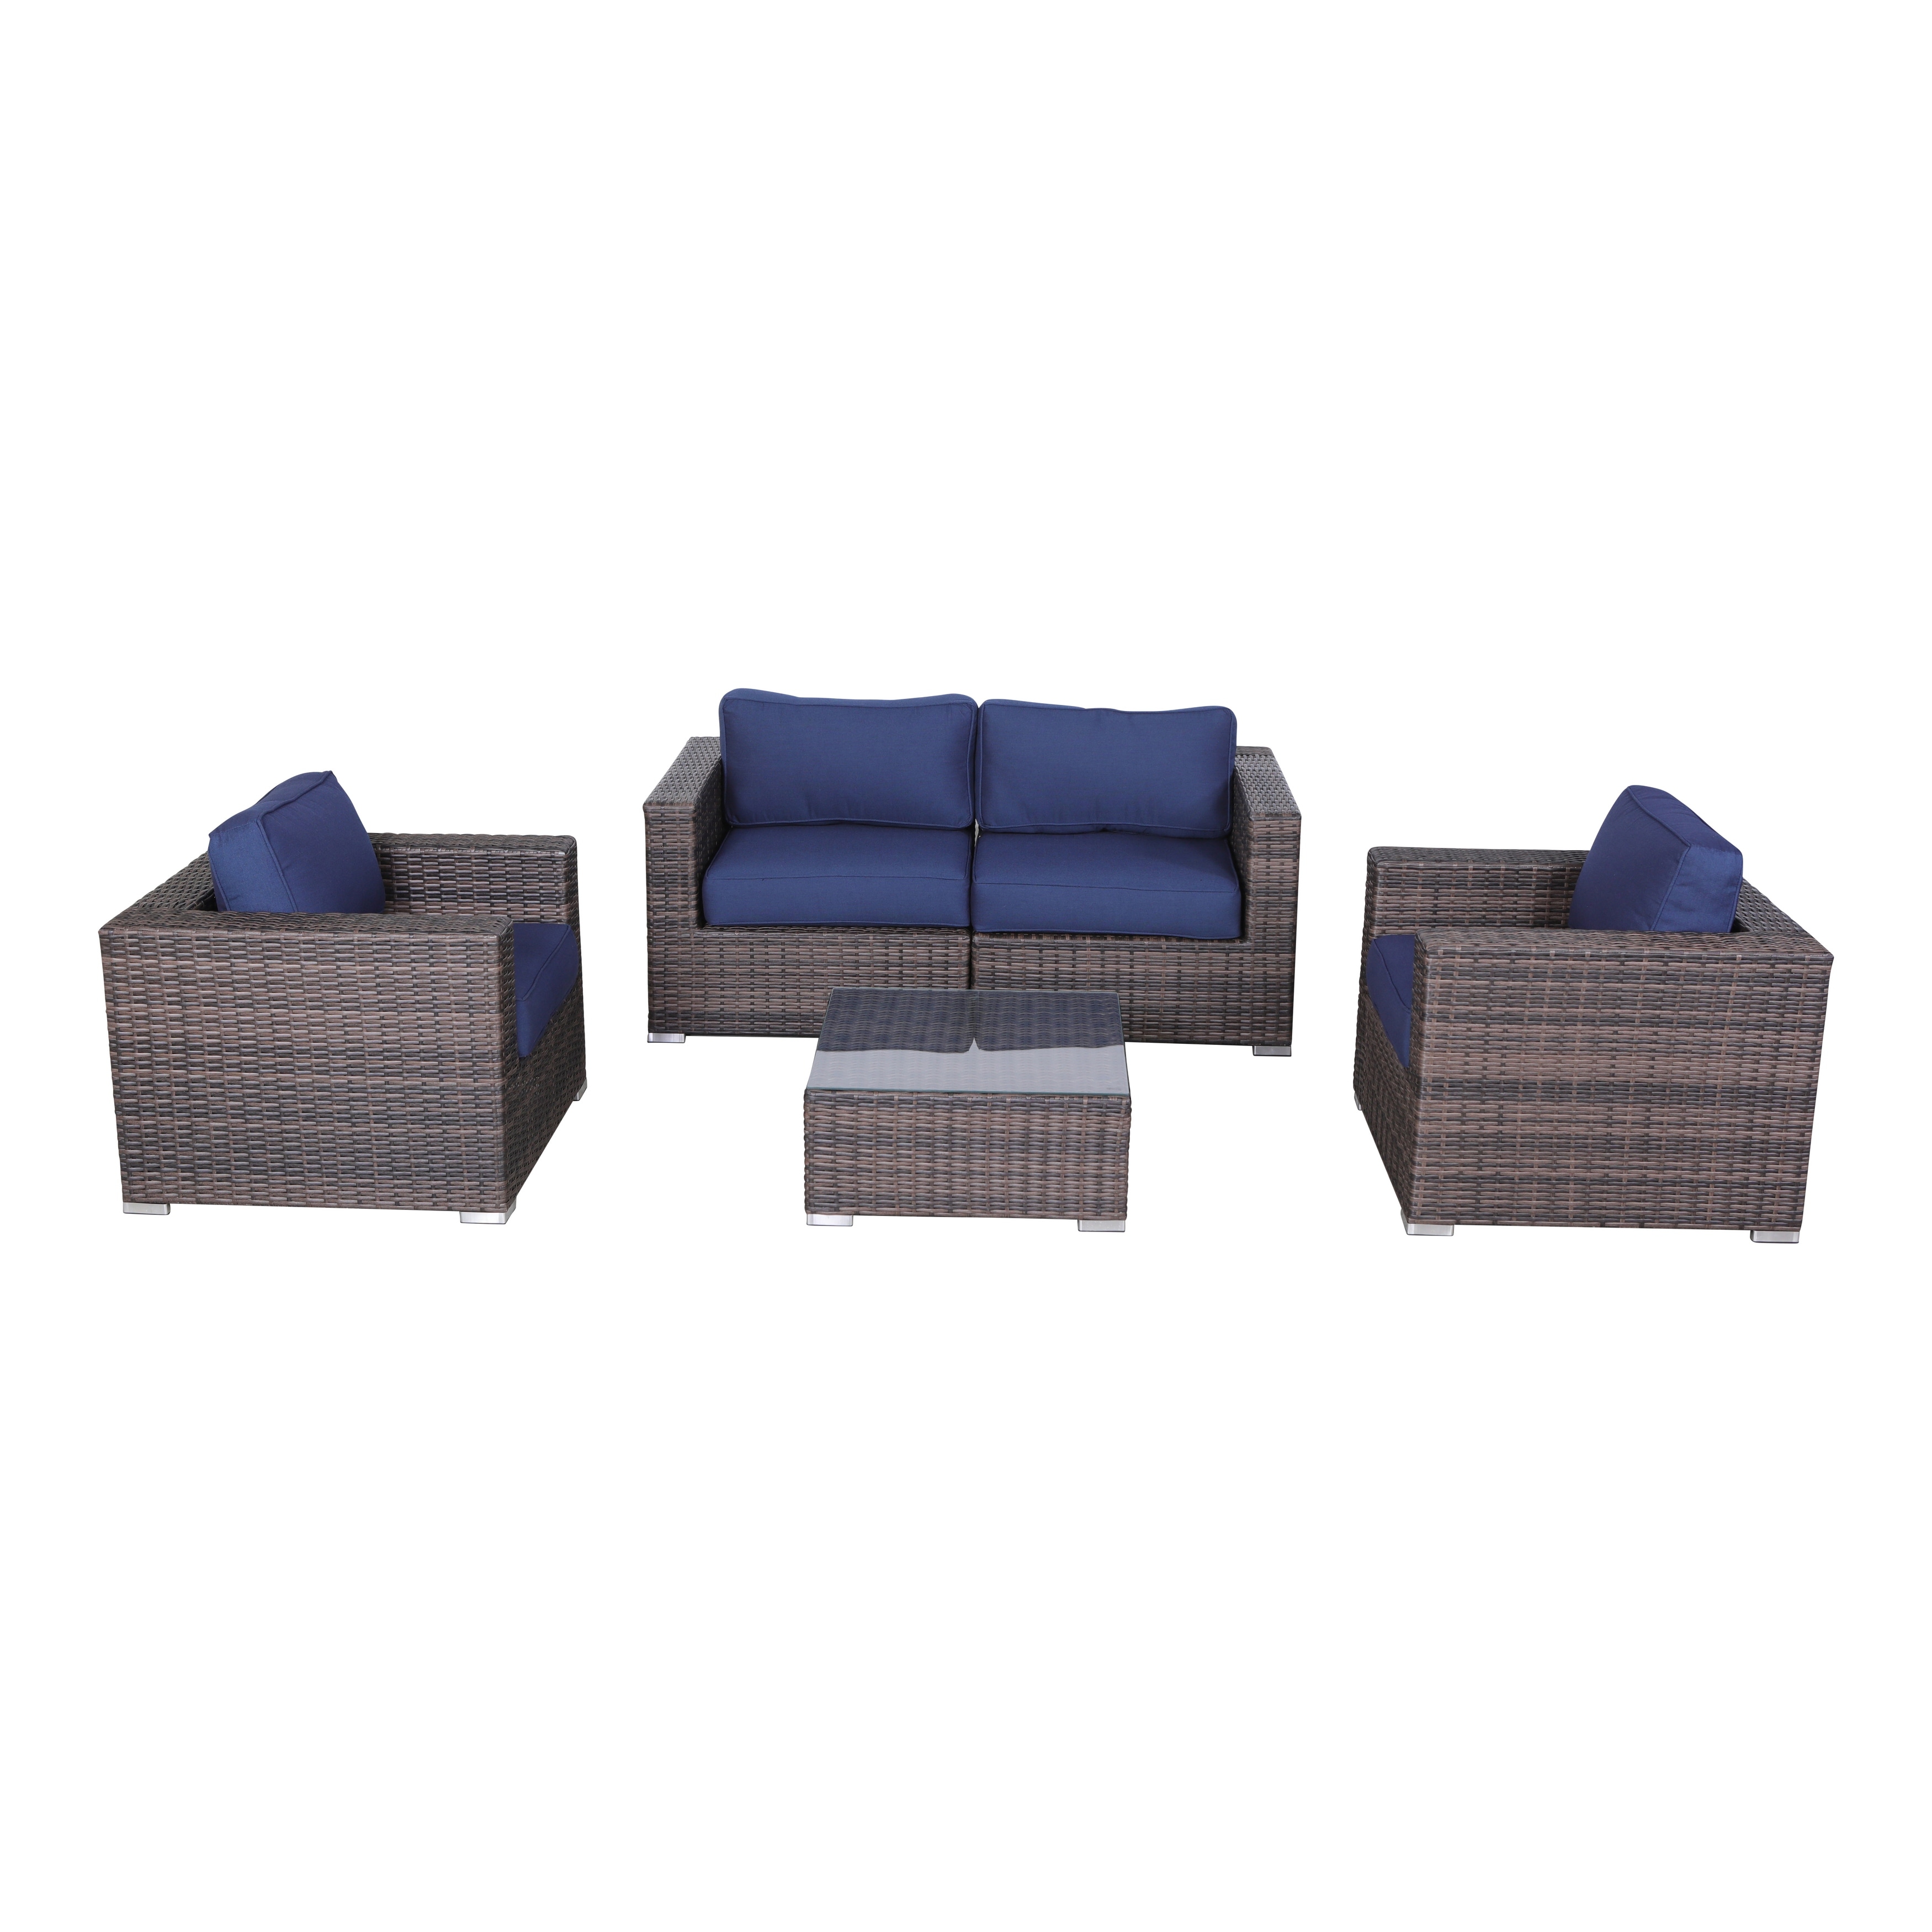 Lsi 4 - Person Wicker Sectional Seating Group With Cushions